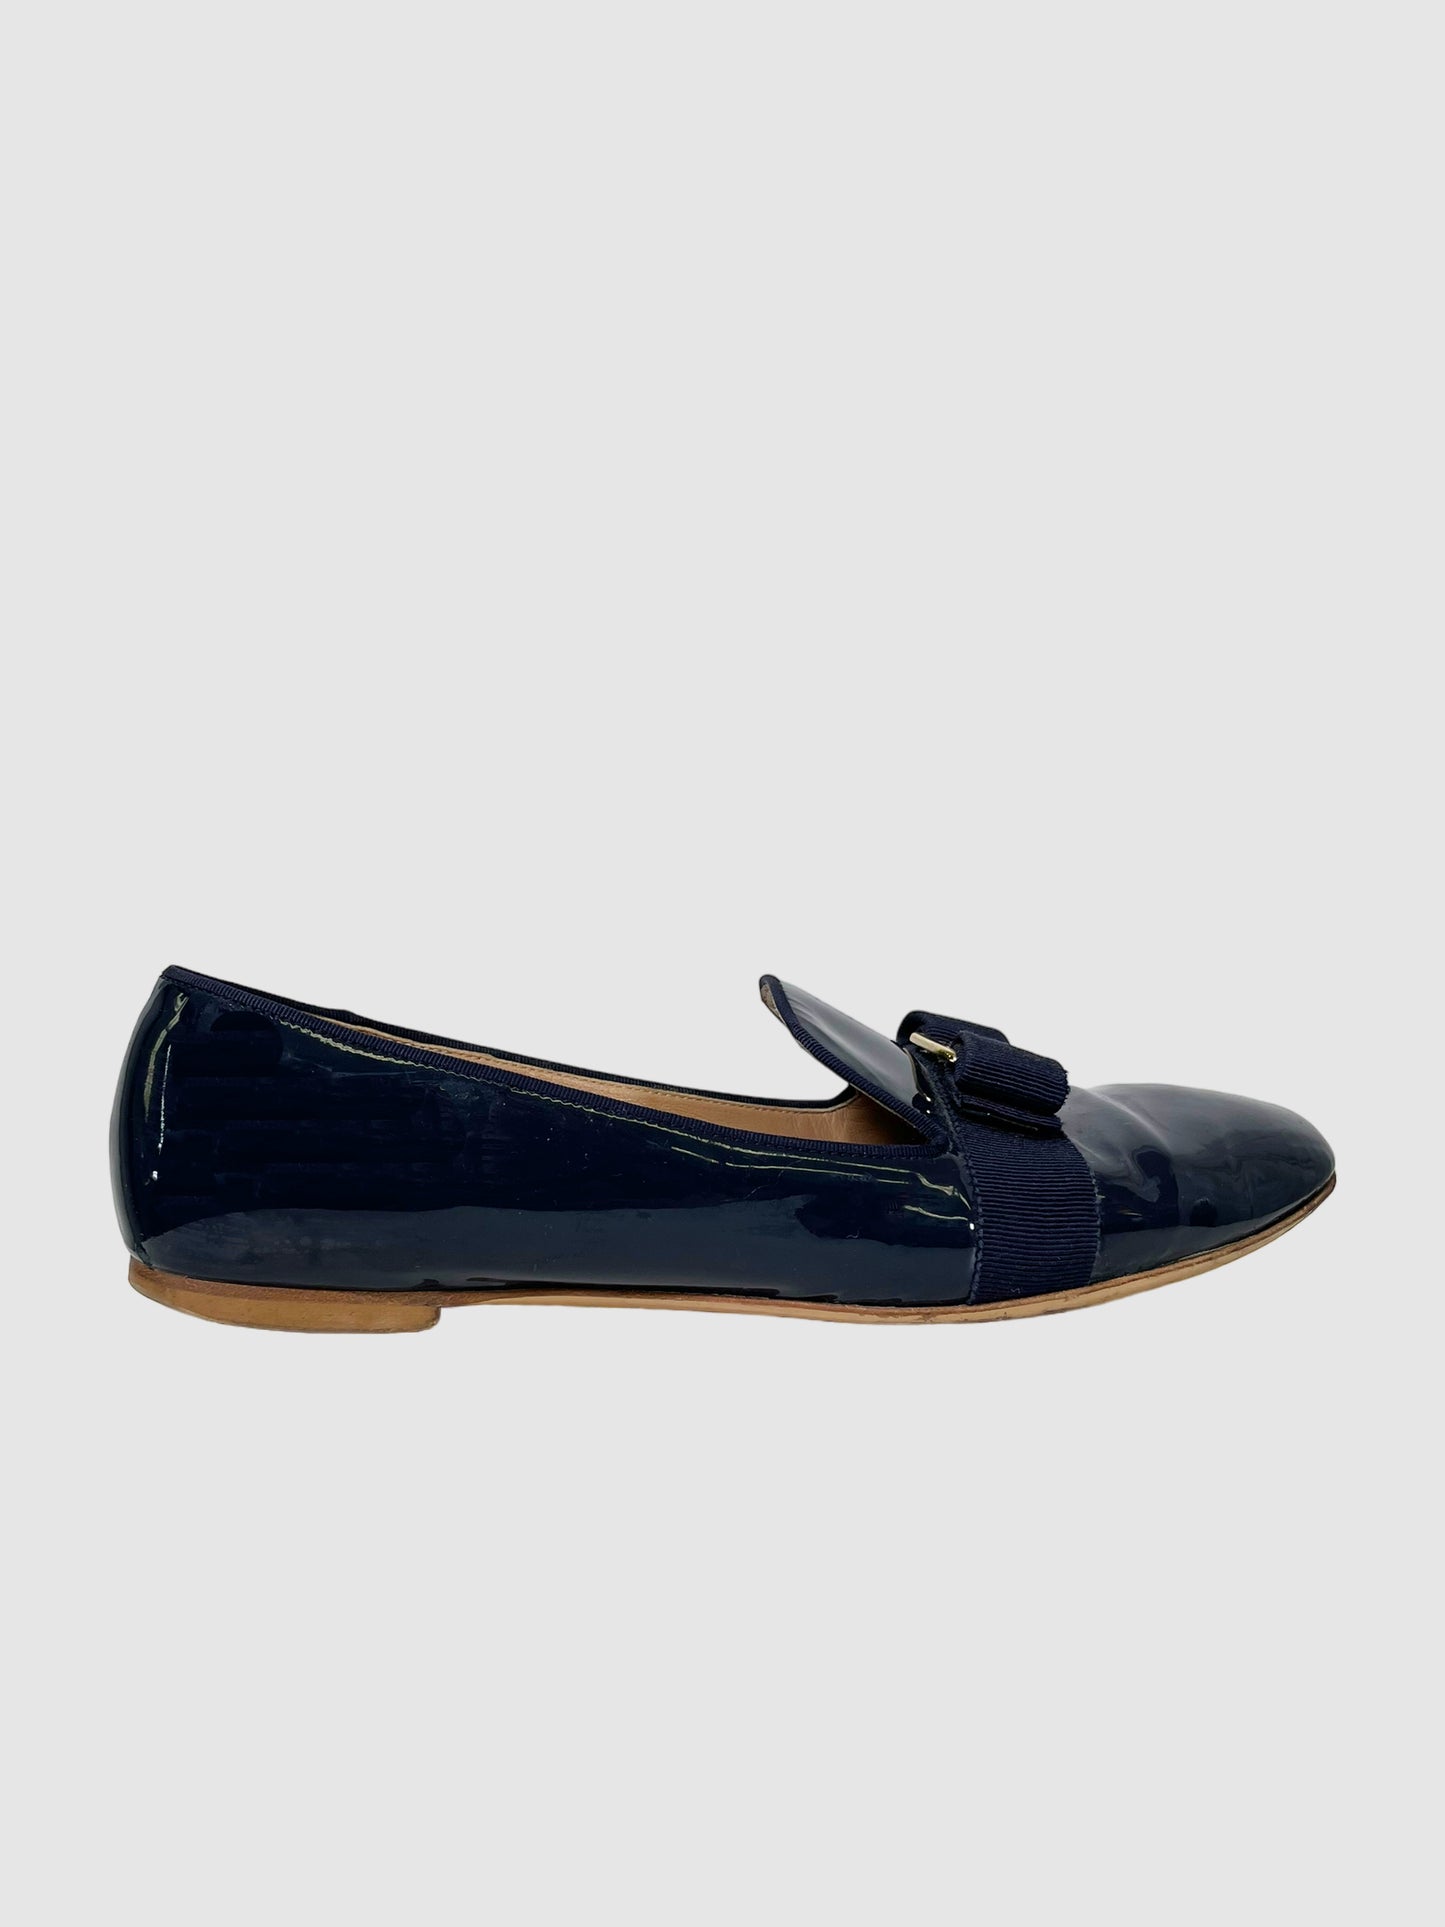 Salvatore Ferragamo Patent Leather Bow Accents Loafers - Size 9.5